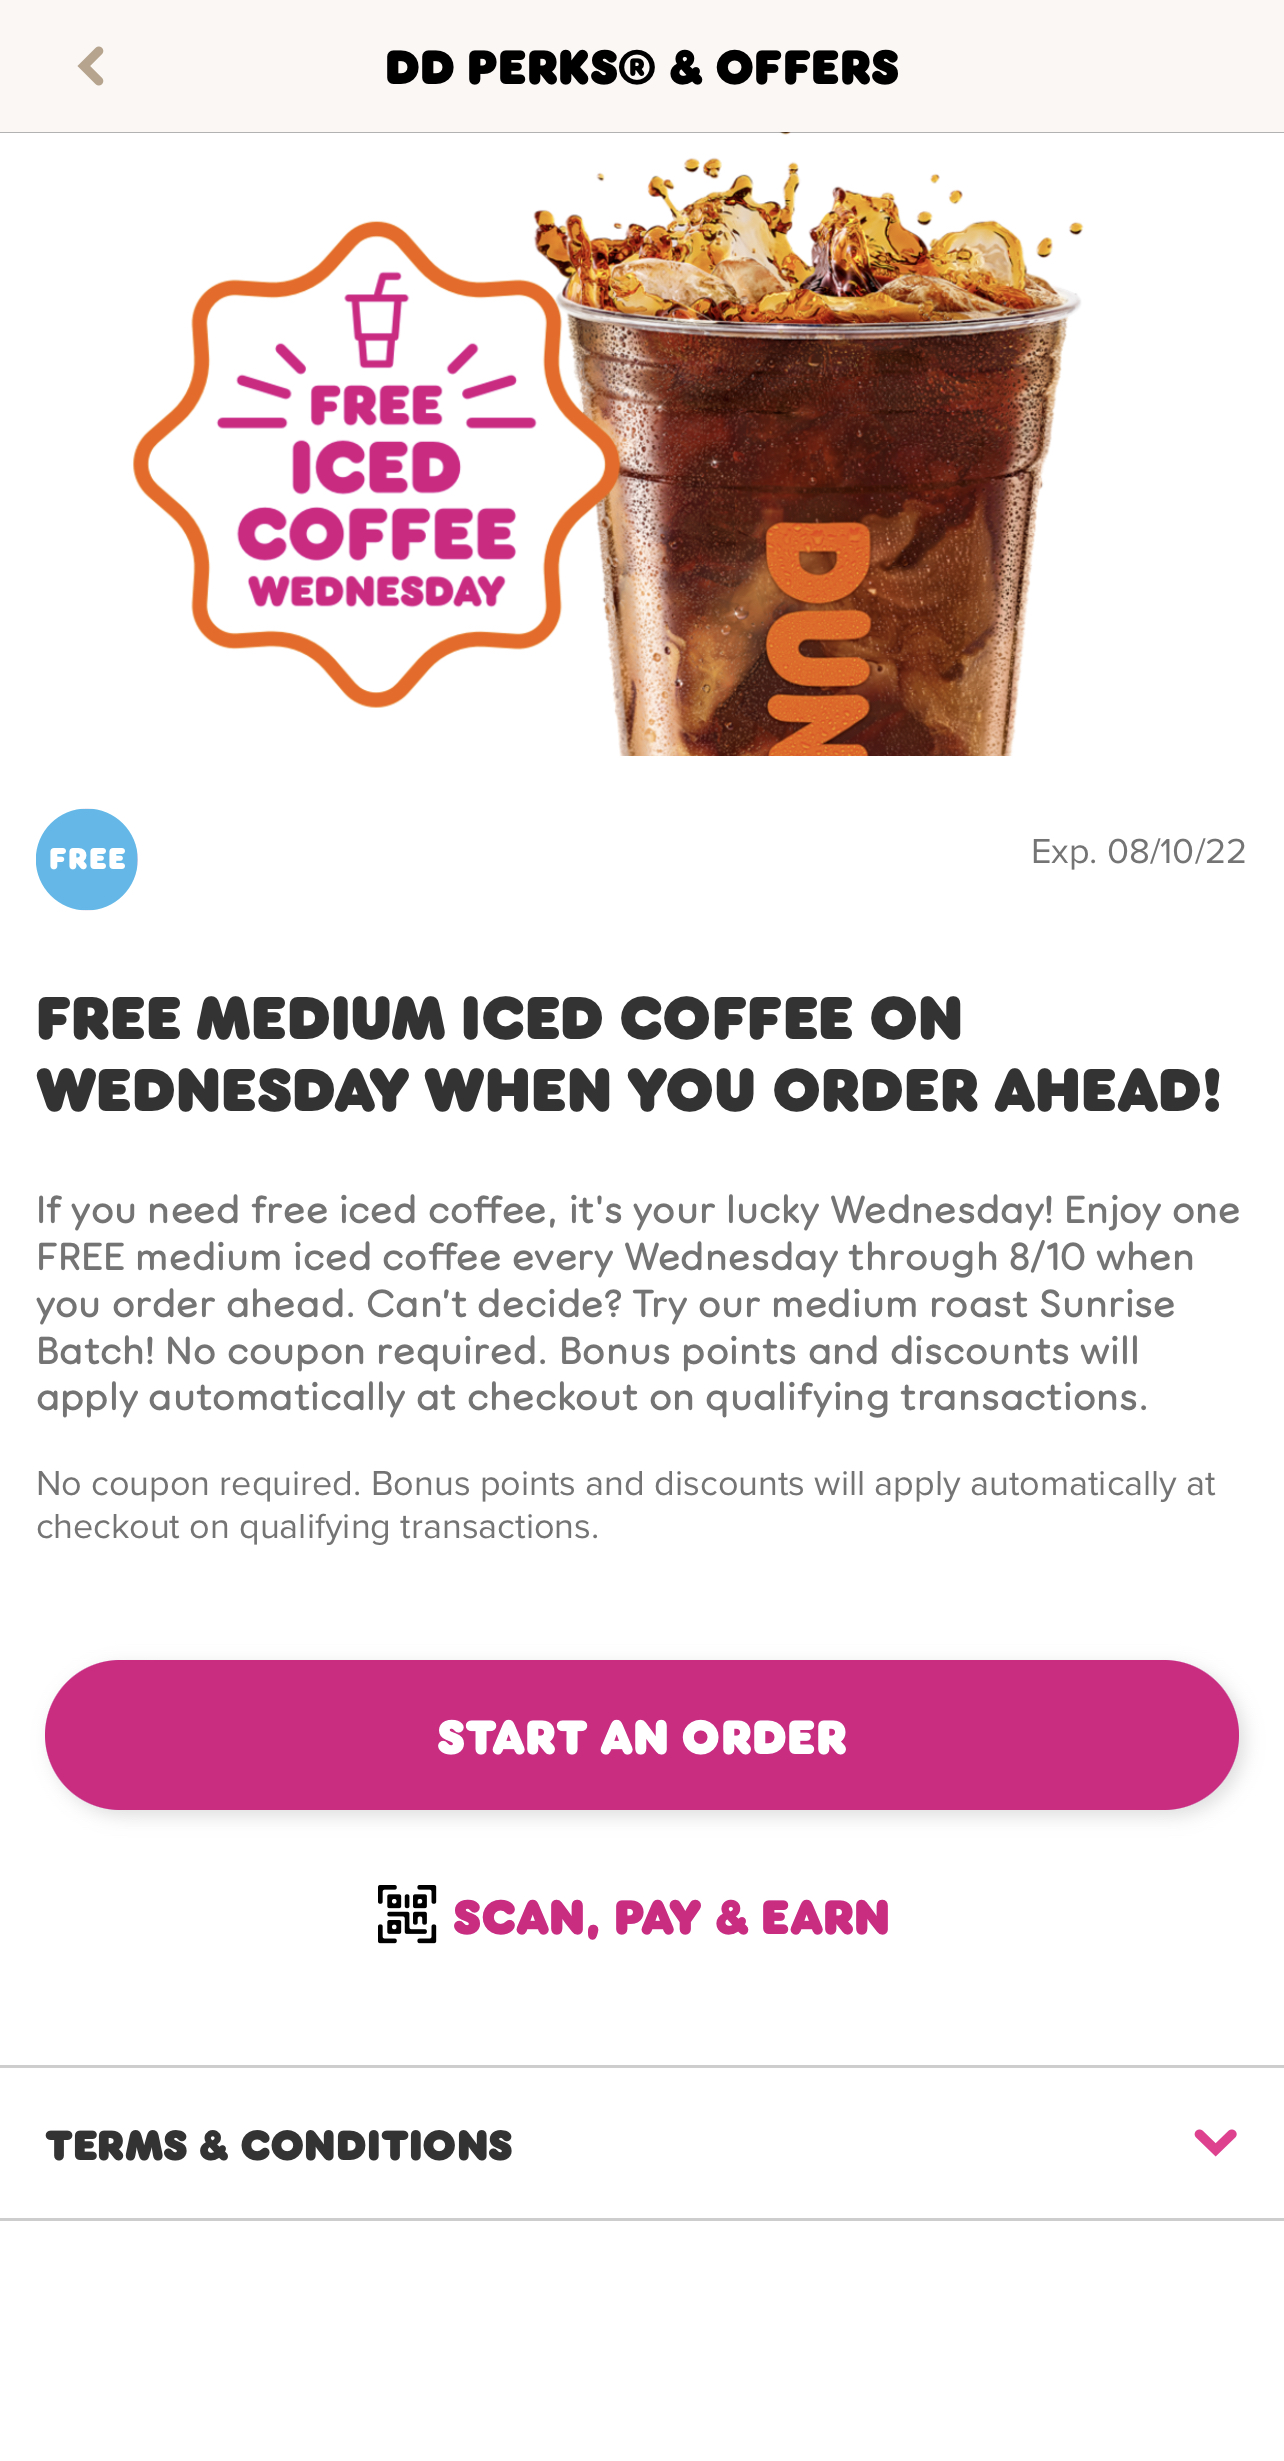 Free Dunkin’ Donuts Iced Coffee with DD Perks App Ordering Ahead (YMMV)